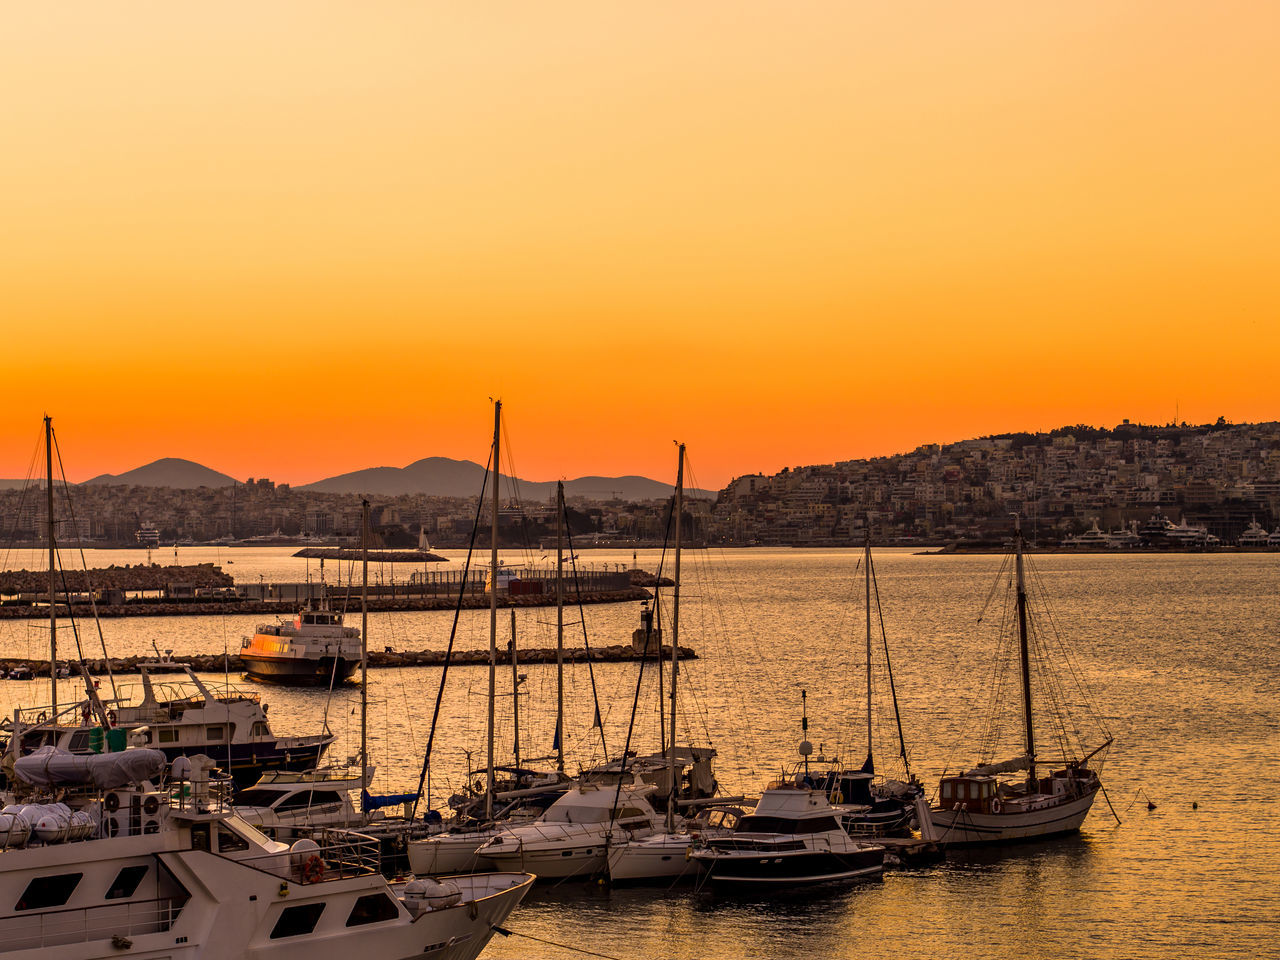 SAILBOATS MOORED IN HARBOR AT SUNSET